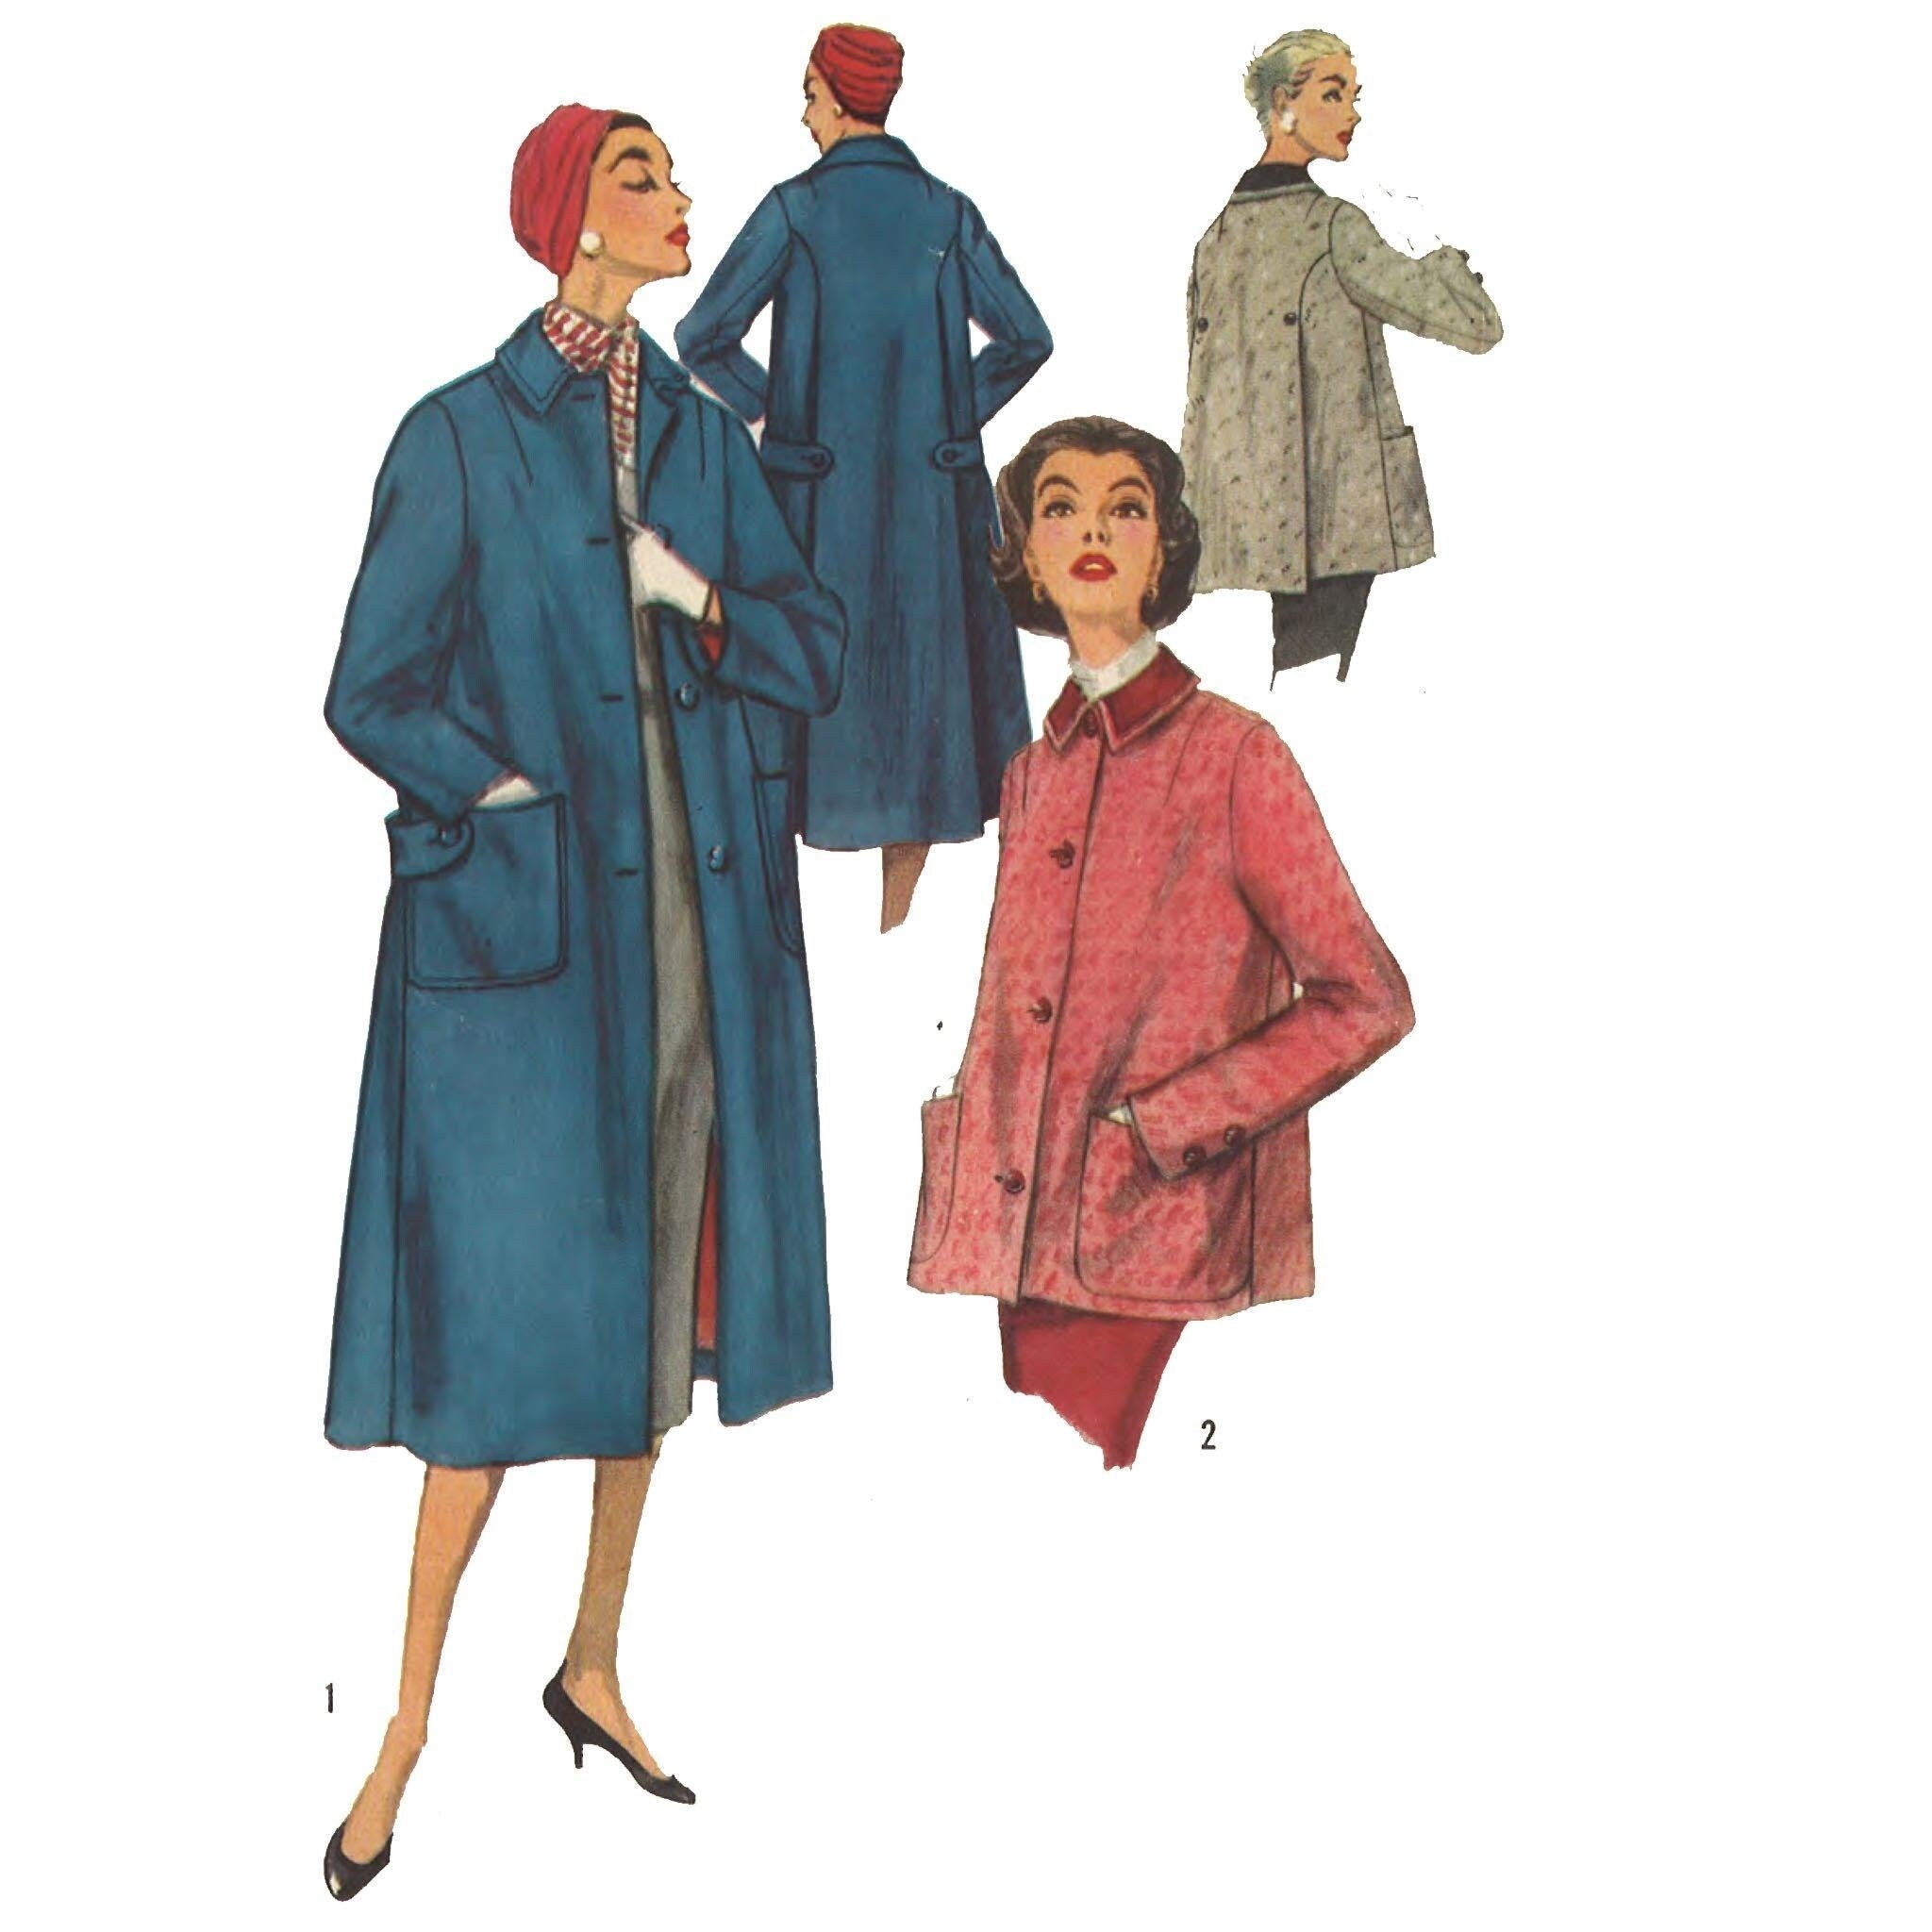 Vintage 1950's Sewing Pattern: Woman's Jacket or Coat Bust 34 86.4